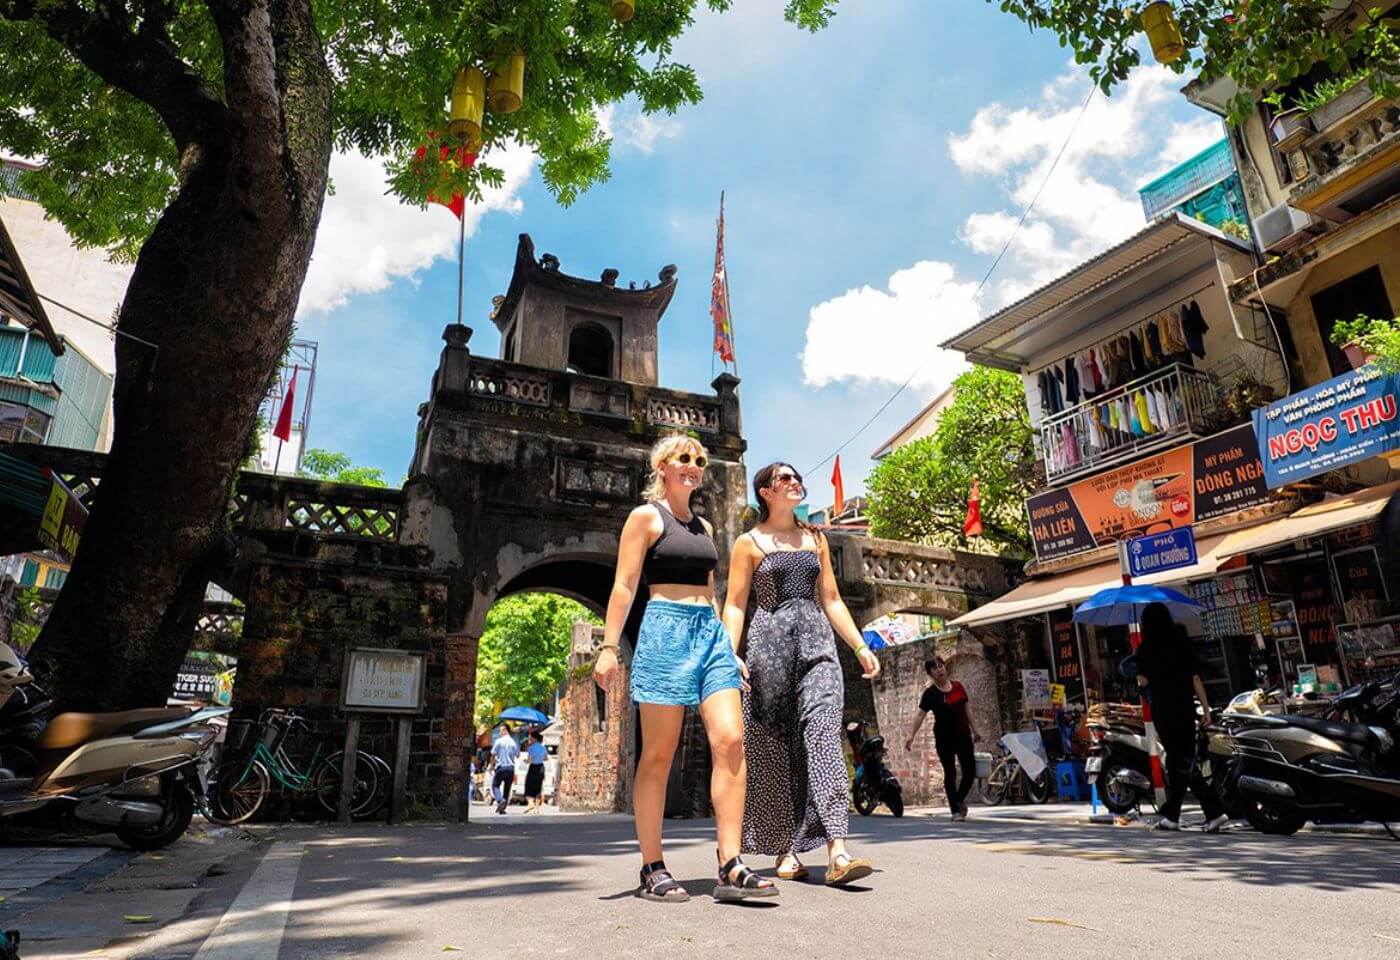 The Real Hanoi: The Old Quarter Walking Experience